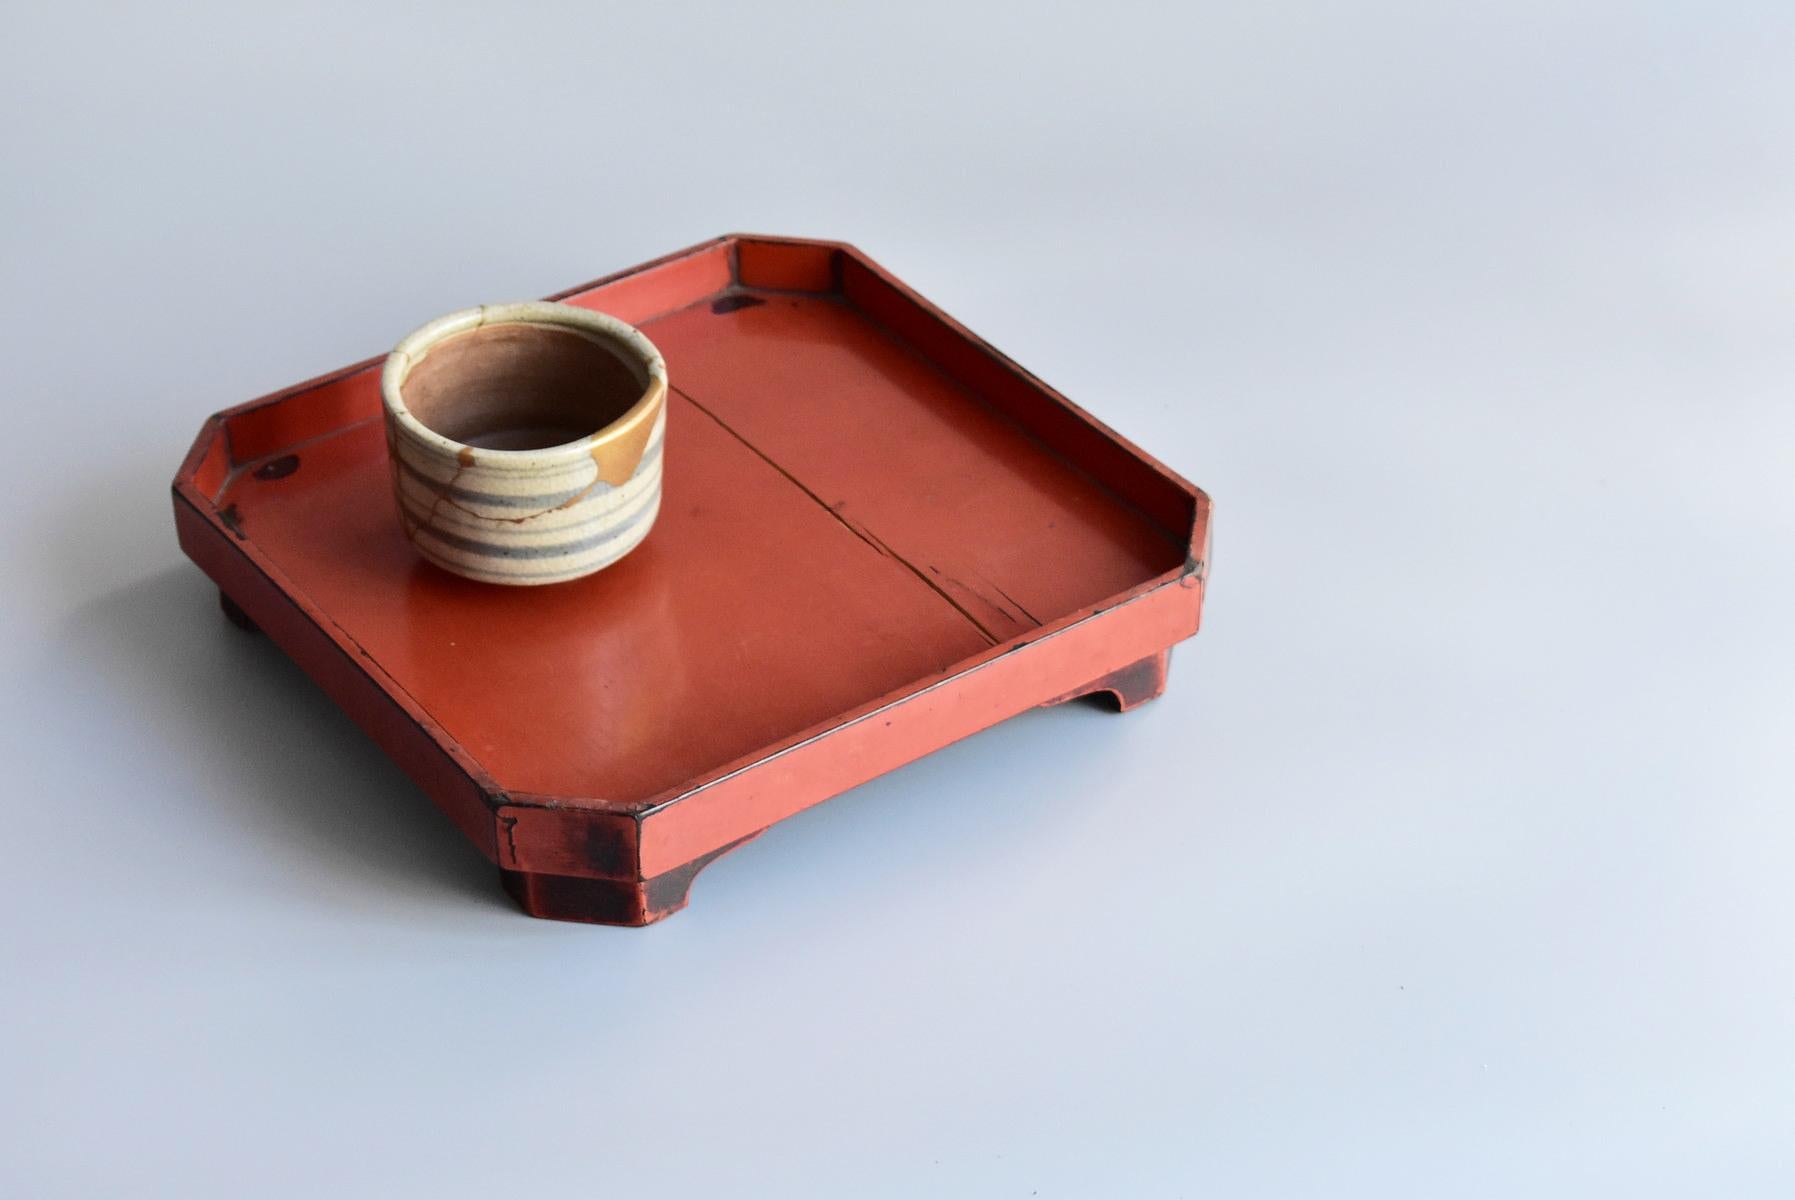 We Japanese introduce unique items with unique aesthetics, purchasing routes, and ways that no one can imitate.

These items date from the mid-Edo period in Japan.
Negoro is one of the Japanese lacquerware painting methods.
It is characterized